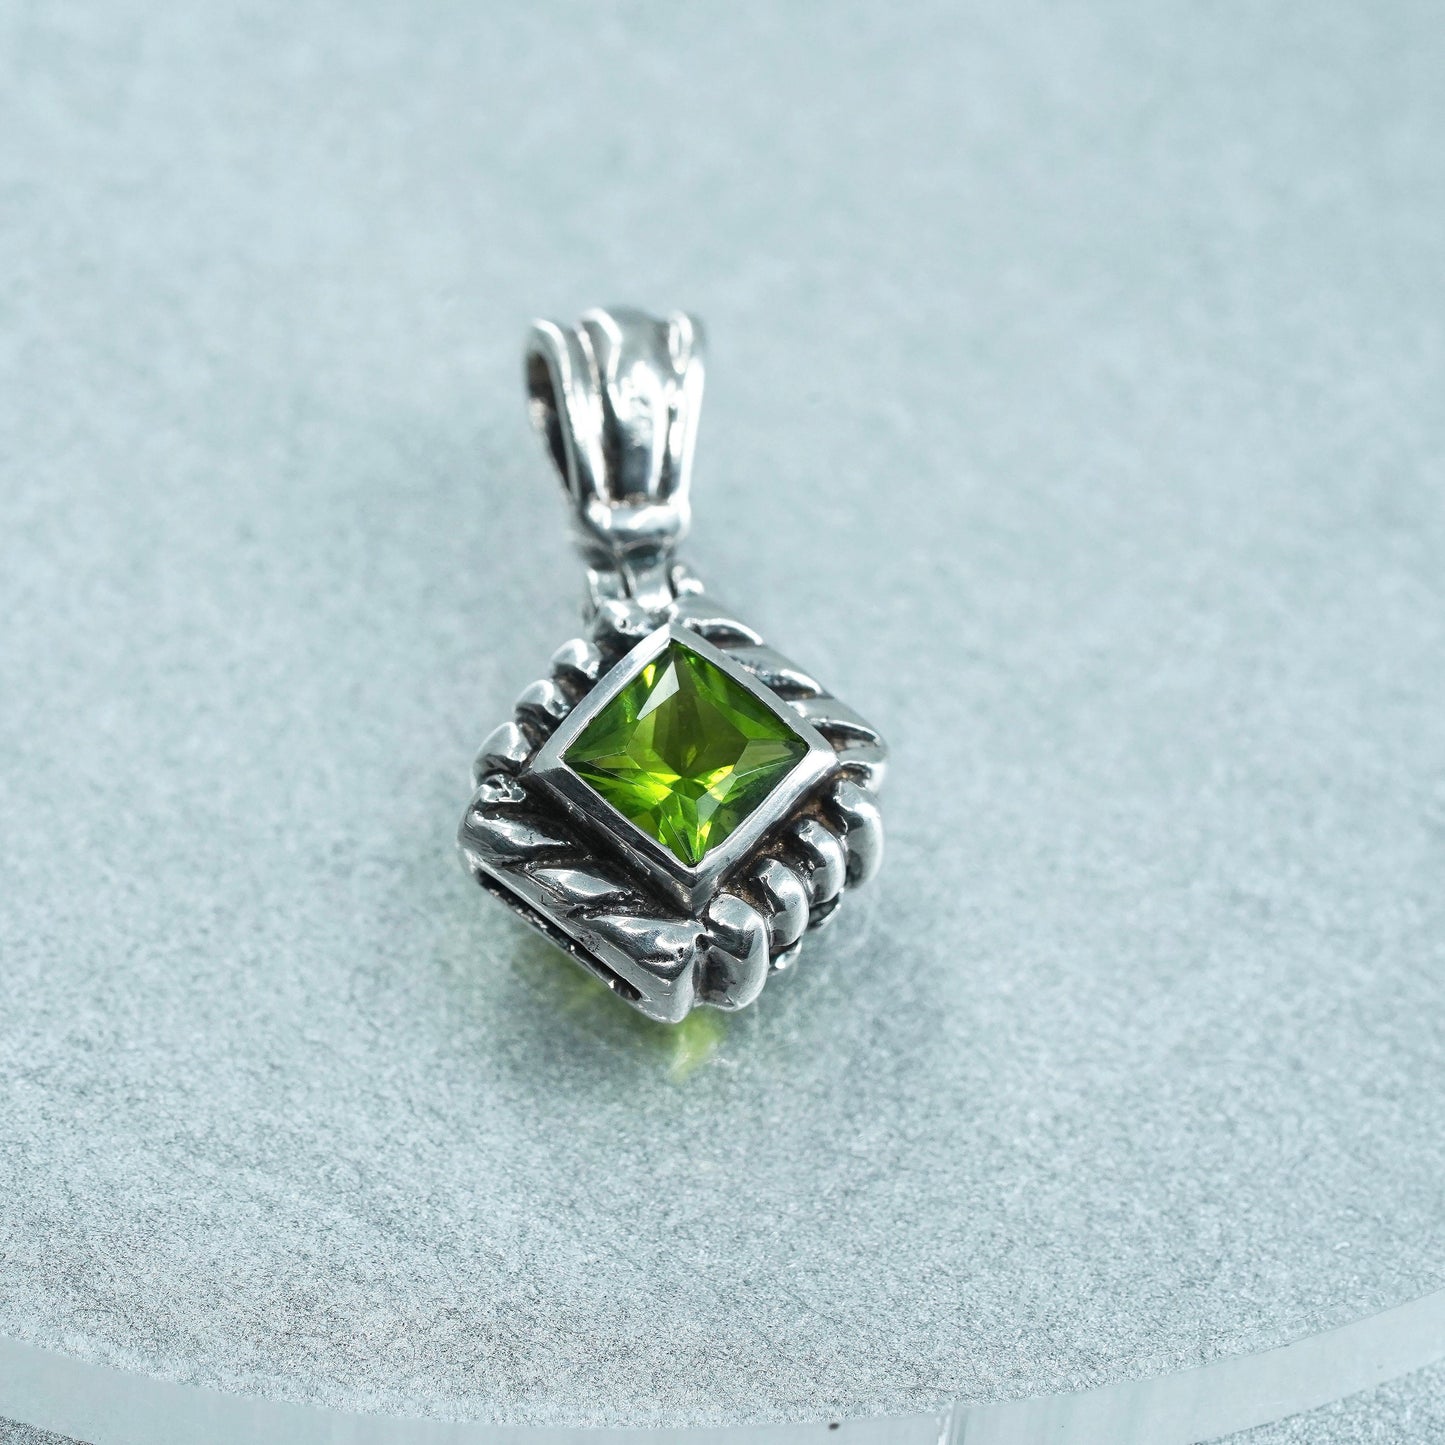 vintage sterling 925 silver handmade cable pendant with square peridot